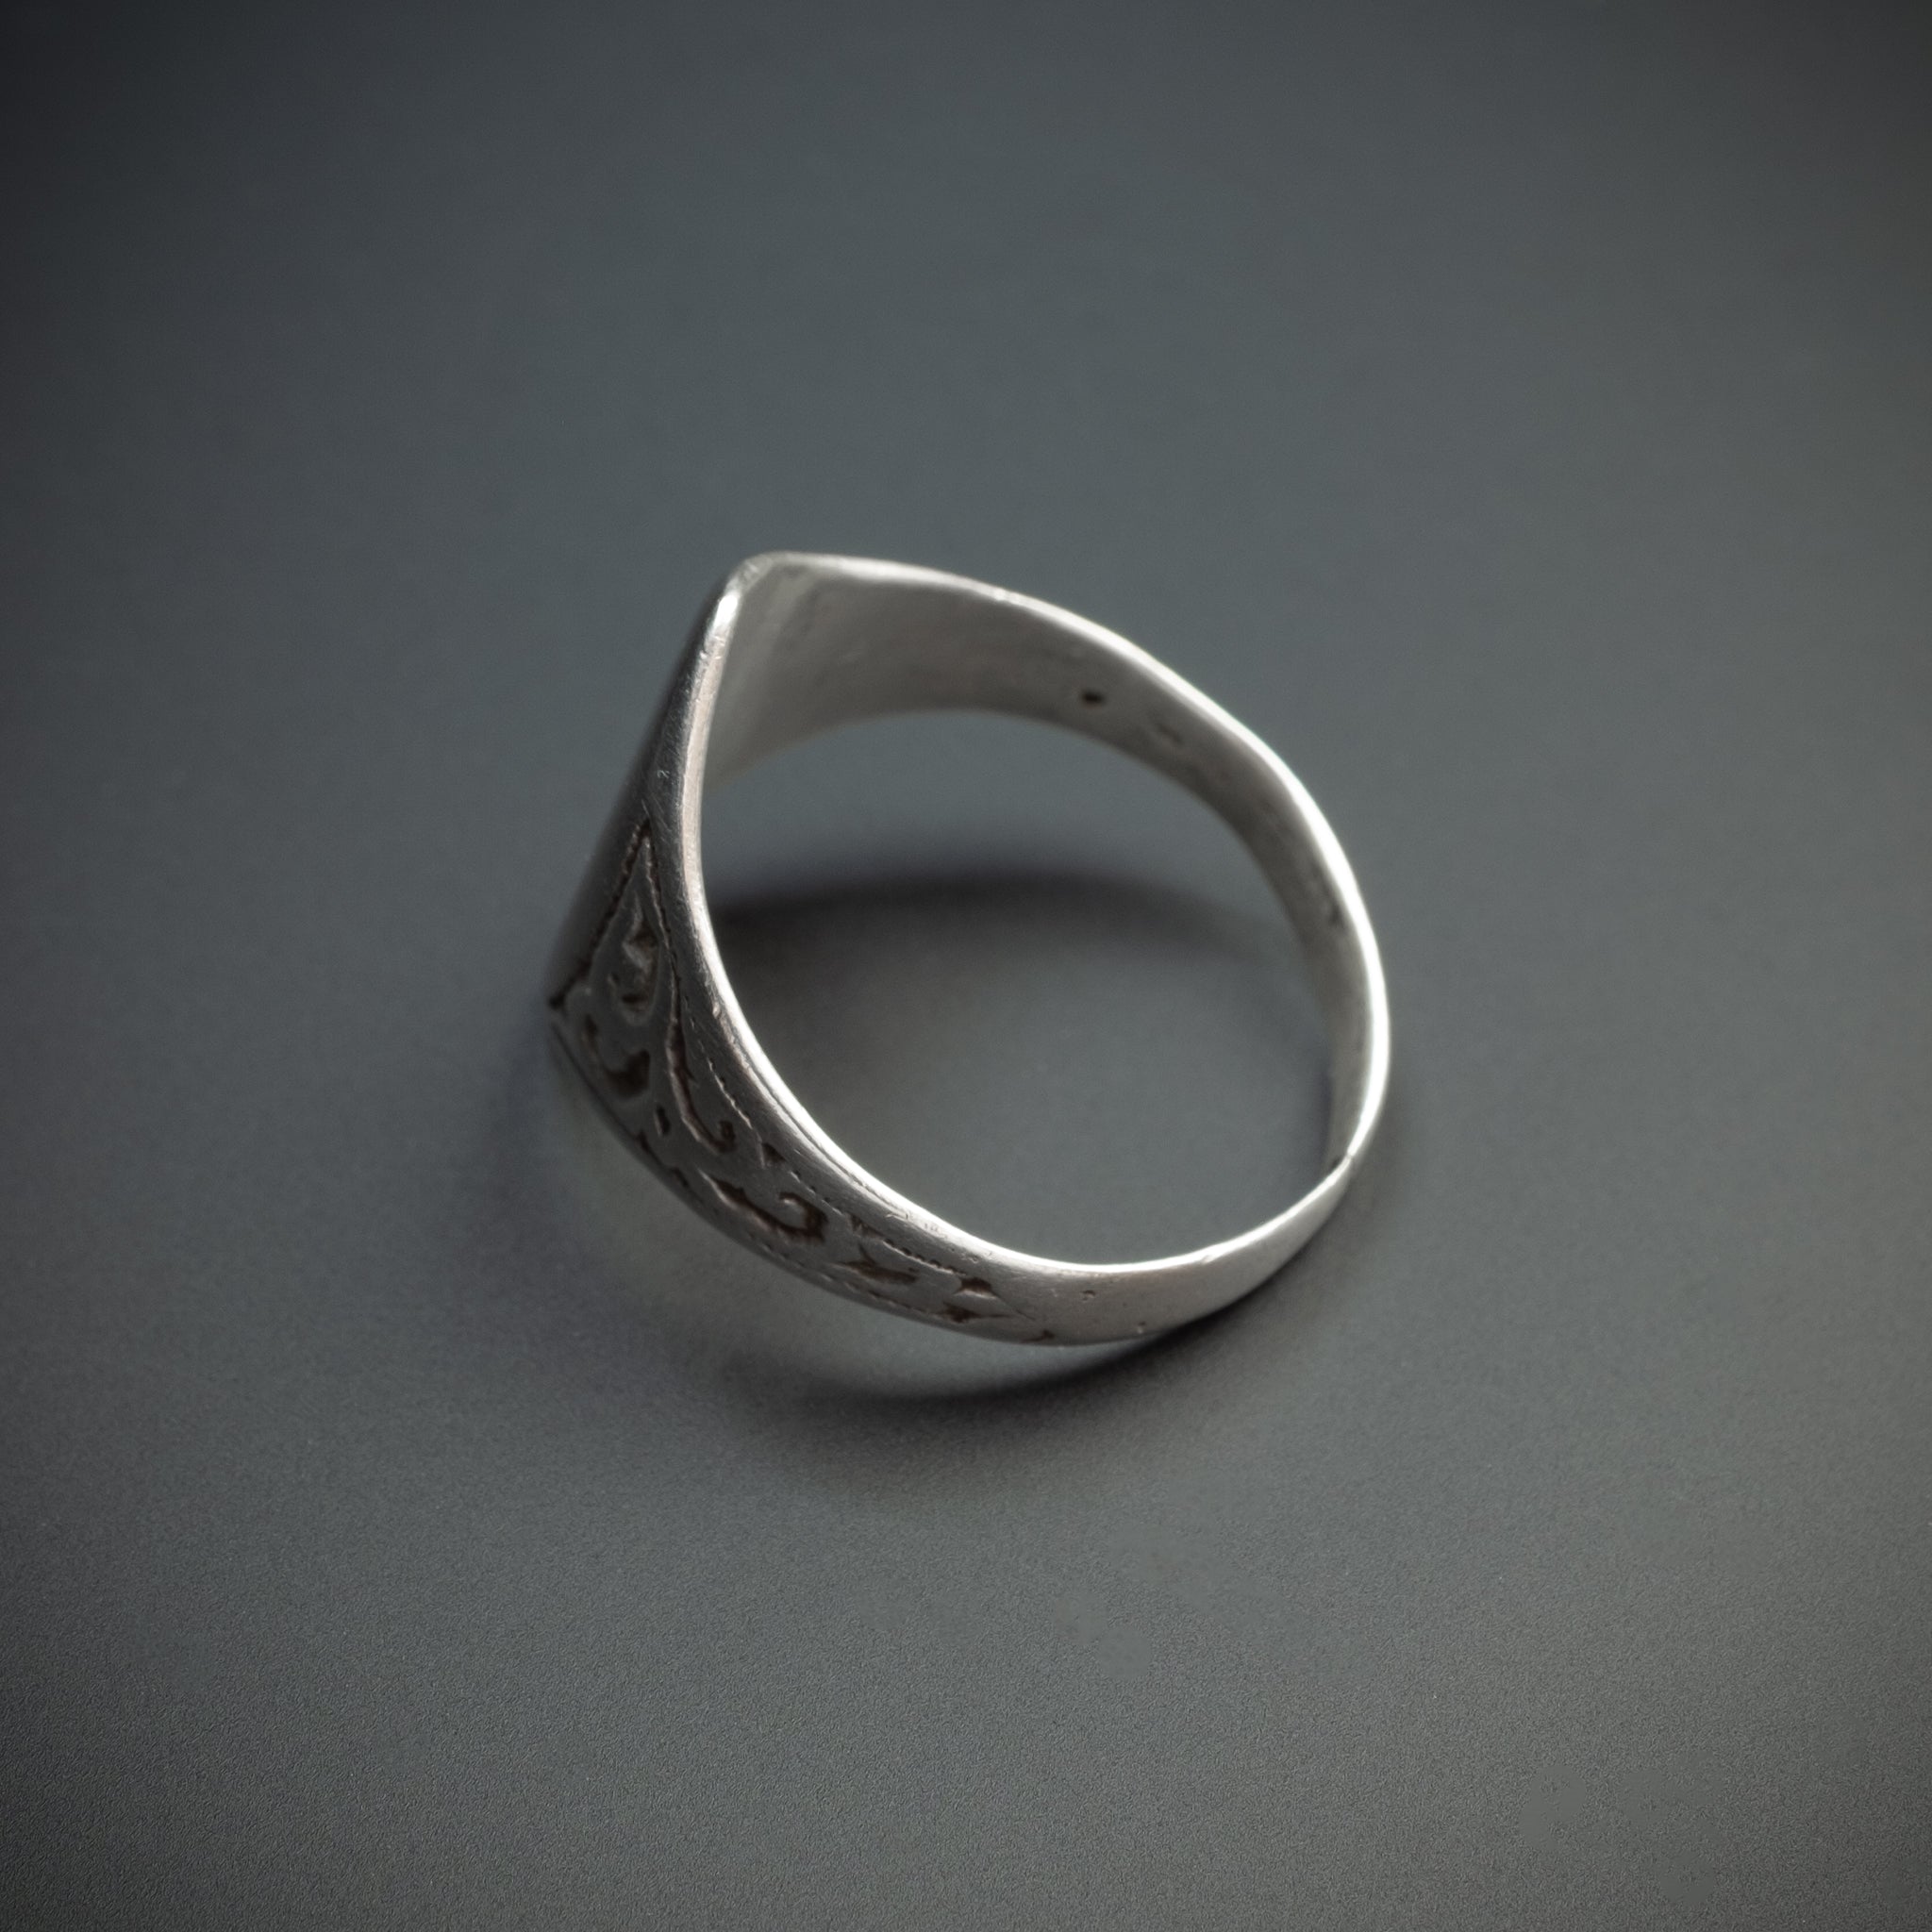 Old Silver Oval Ring, Essaouira, Morocco